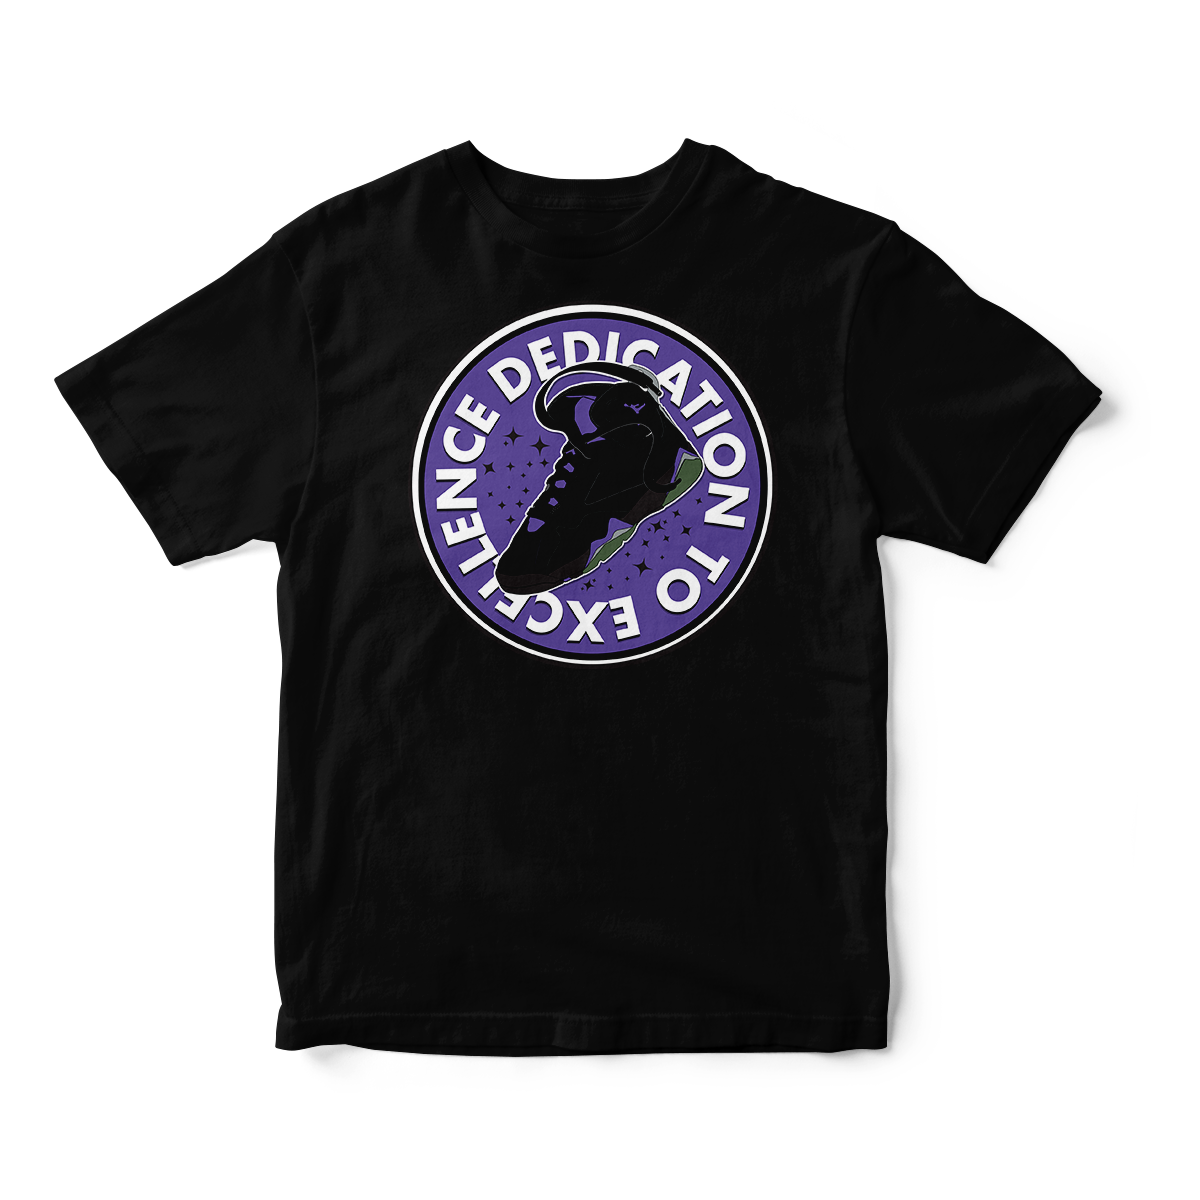 Dedication To Excellence in Purple Short Sleeve Tee